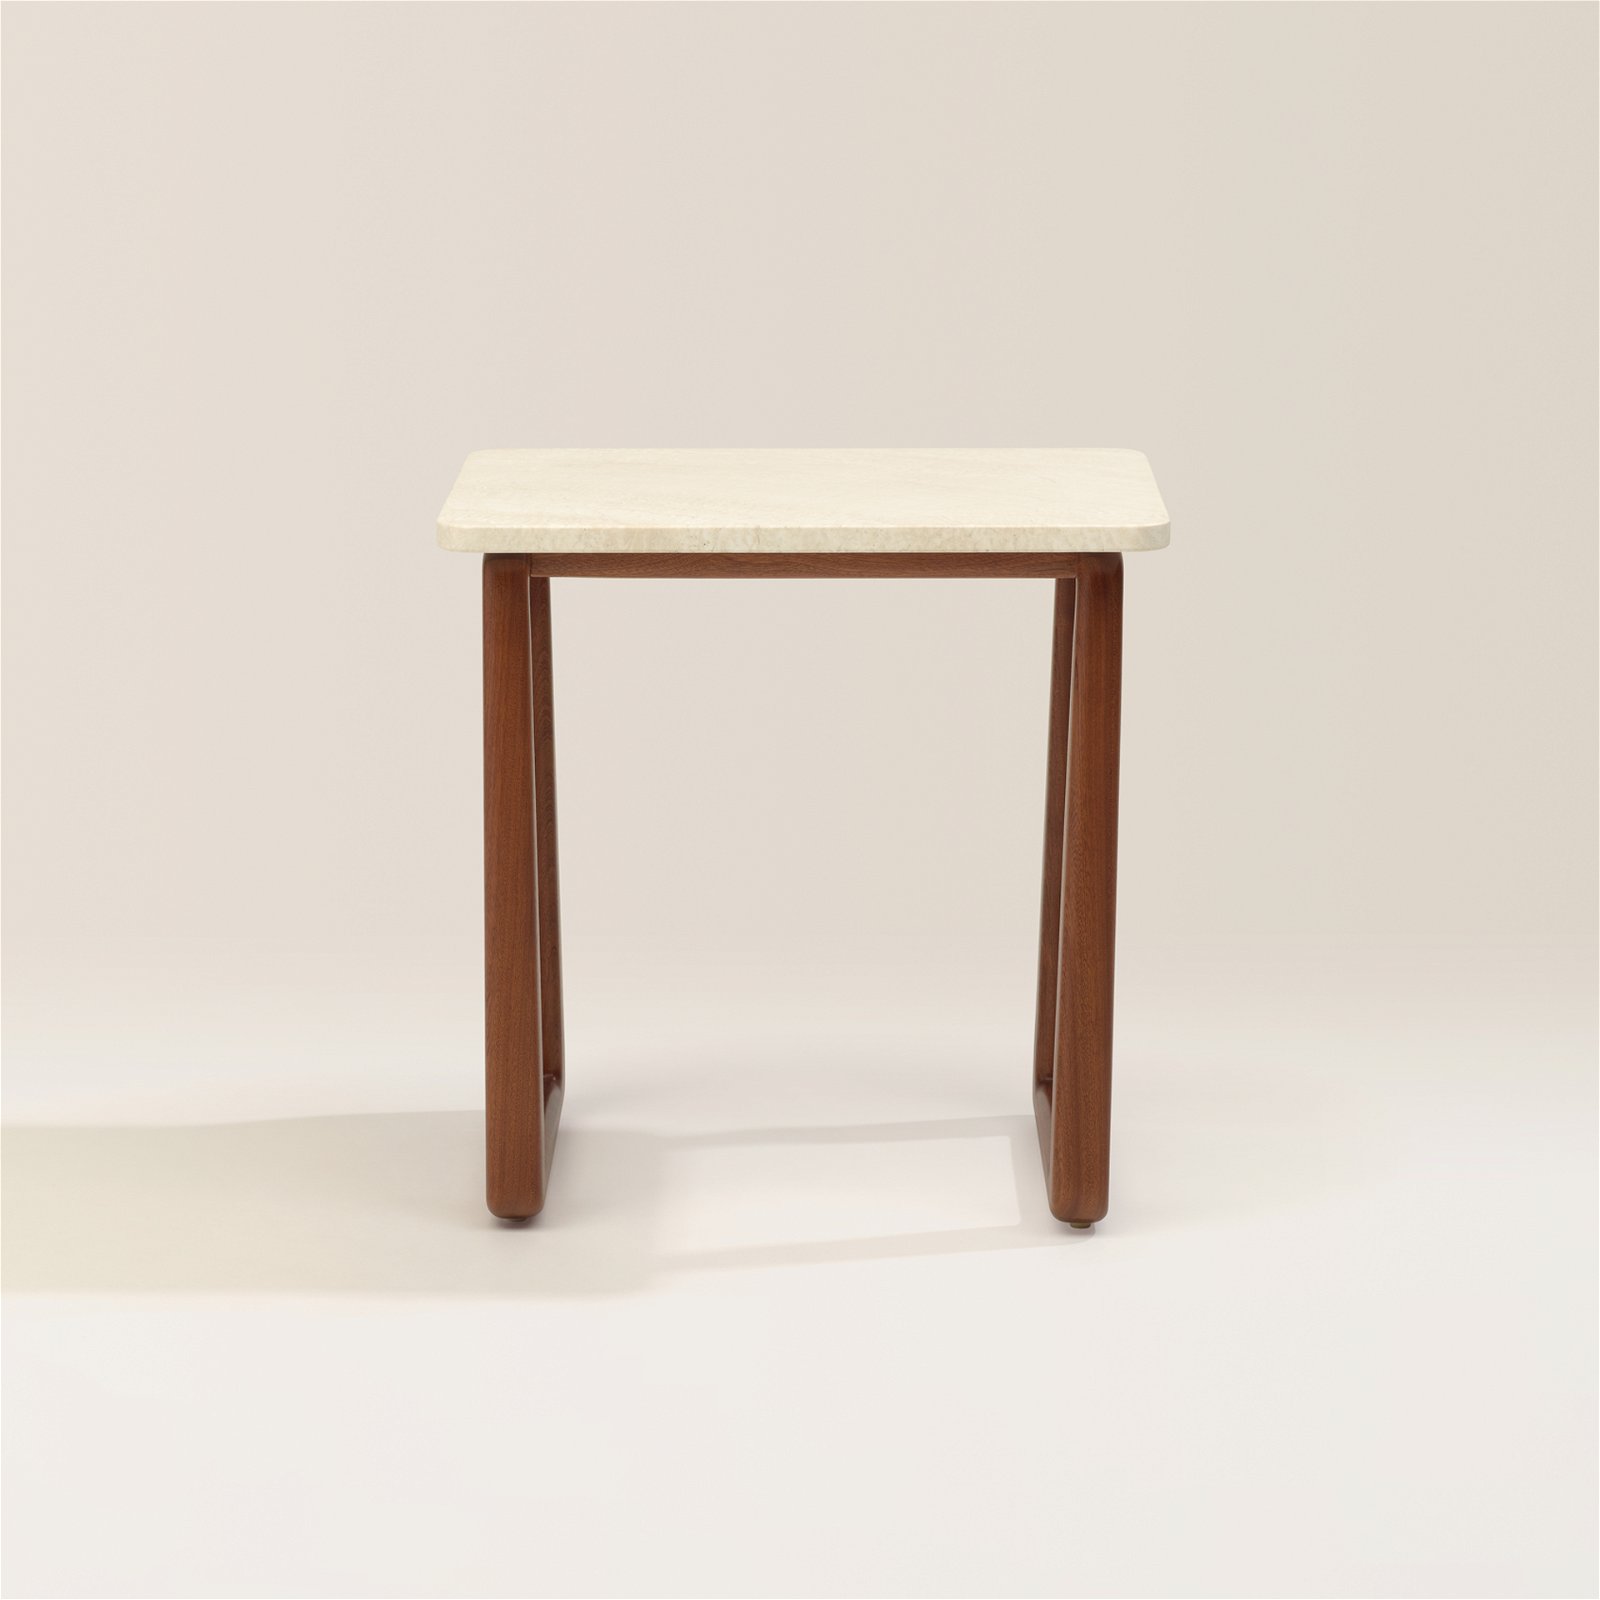 Loro Piana Interiors The Delight chairs by Exteta high side table